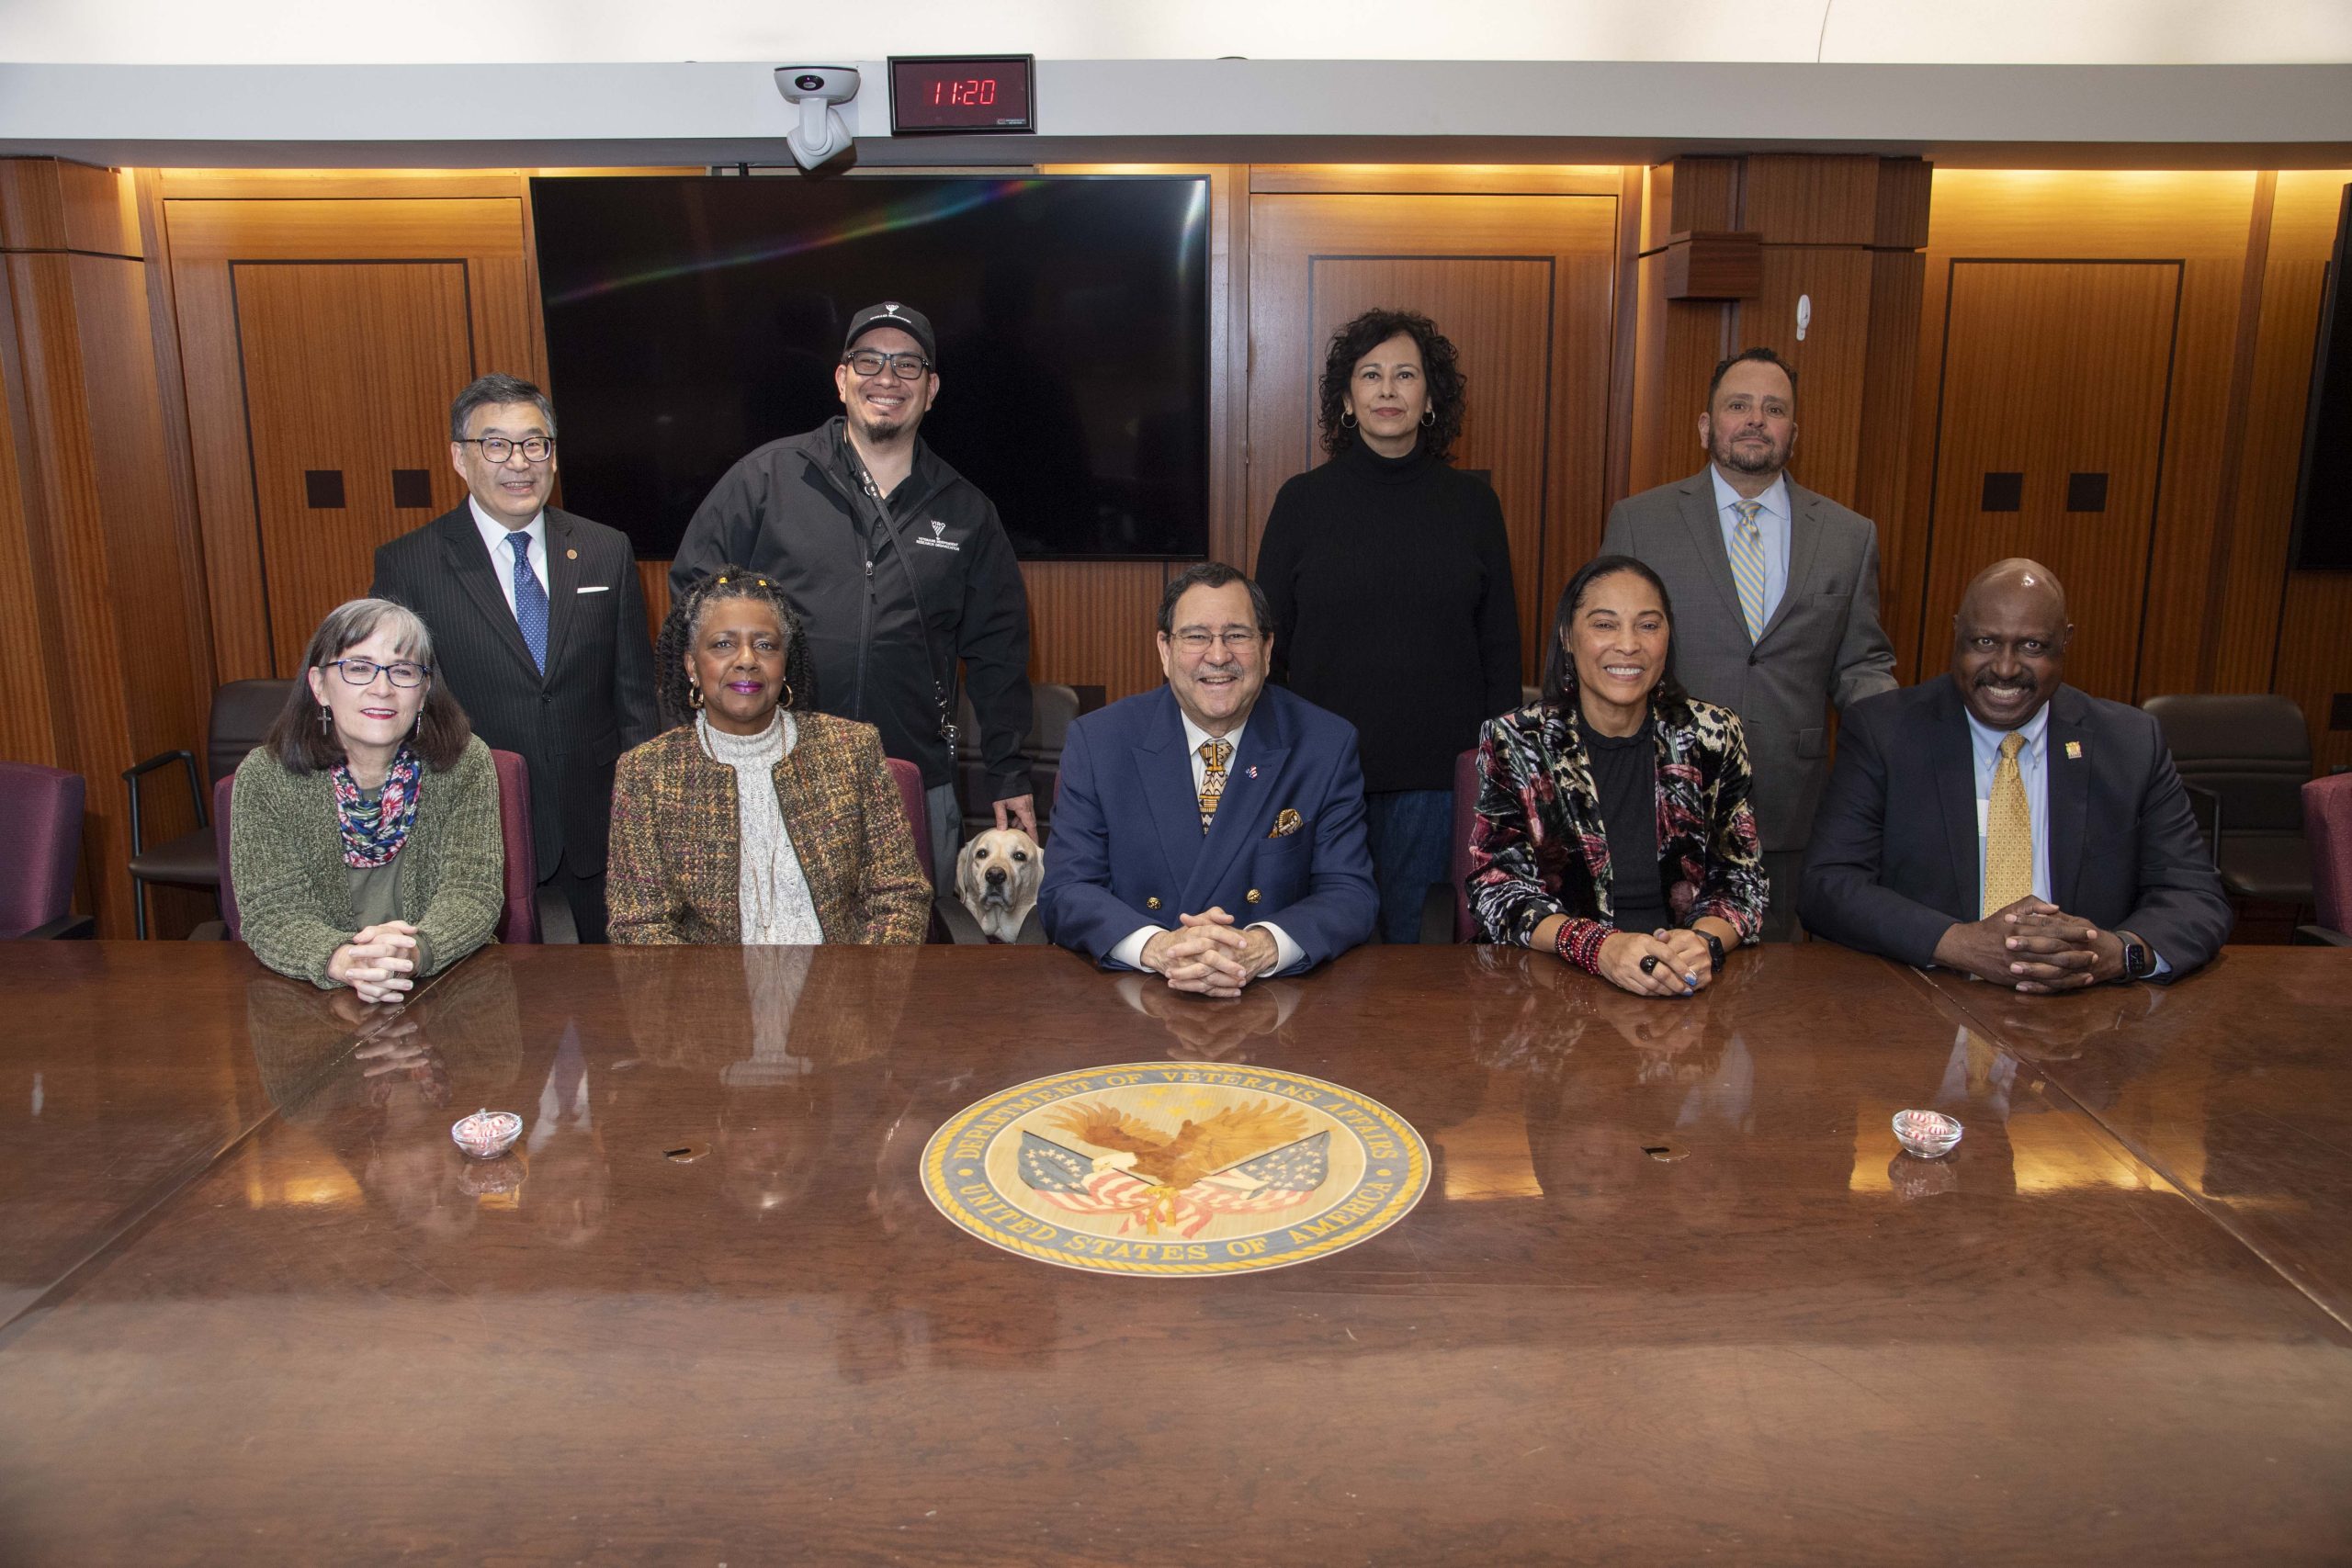 For the first time in nearly three years (due to the global COVID-19 pandemic), the Advisory Committee on Minority Veterans (ACMV) was able to meet in person.